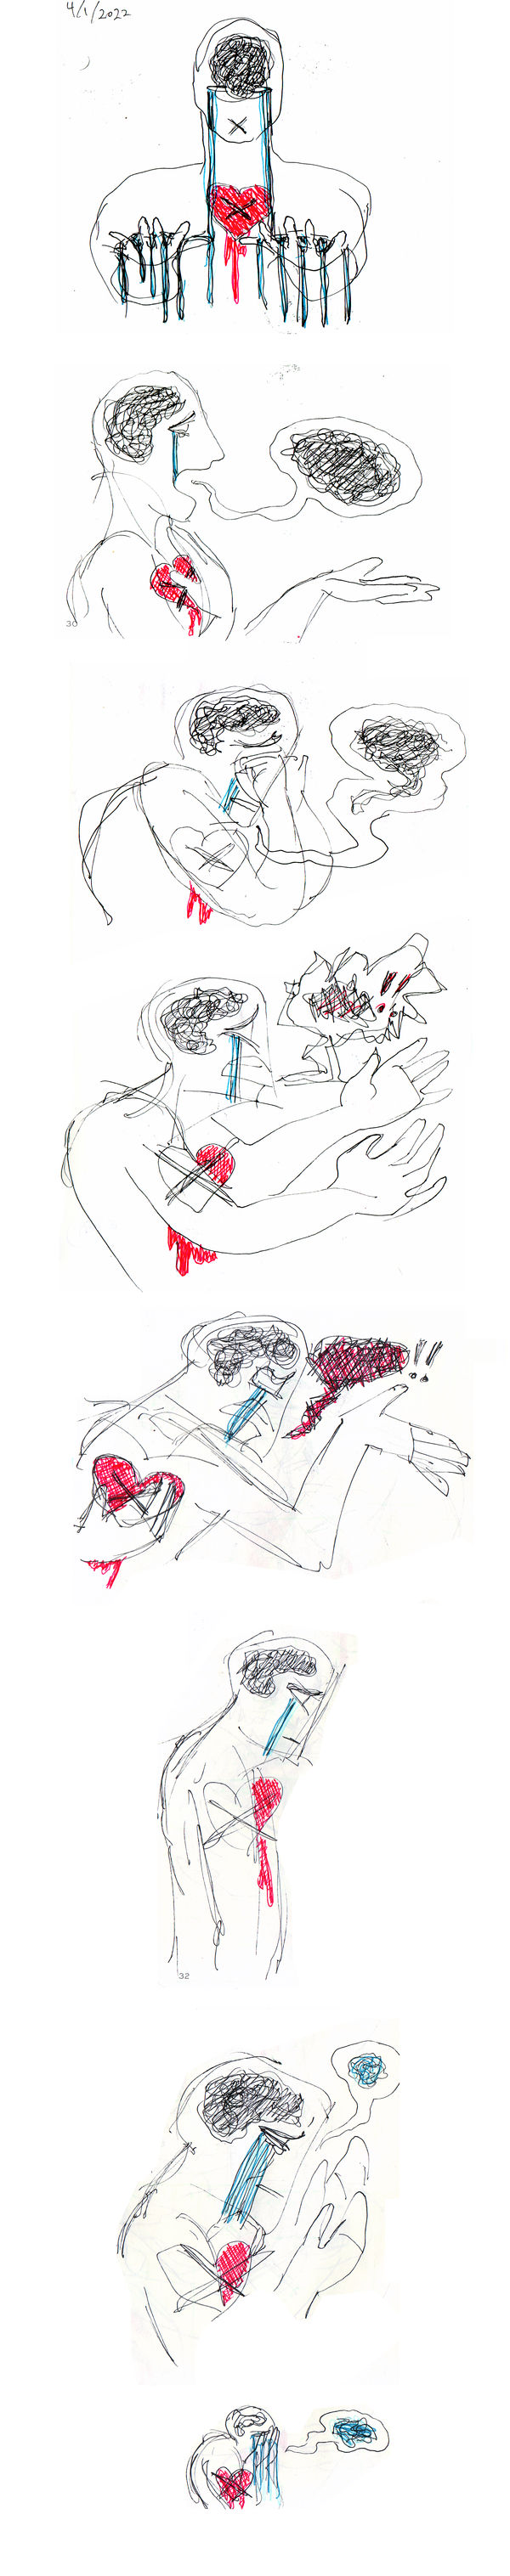 A short, wordless comic strip, depicting a scribbly white figure, featureless except for a big red heart on its chest with a black X over it, a cloud of black scribbles in its skull, and streams of blue pouring from its eyes. It weeps, tries to speak, but all that comes out is scribbly black. It gets more and more upset, and the black scribbles get tainted with red. Finally, it stops talking, puts its face in its hands, and cries. From its speech bubble emanates black and blue tangled scribble.